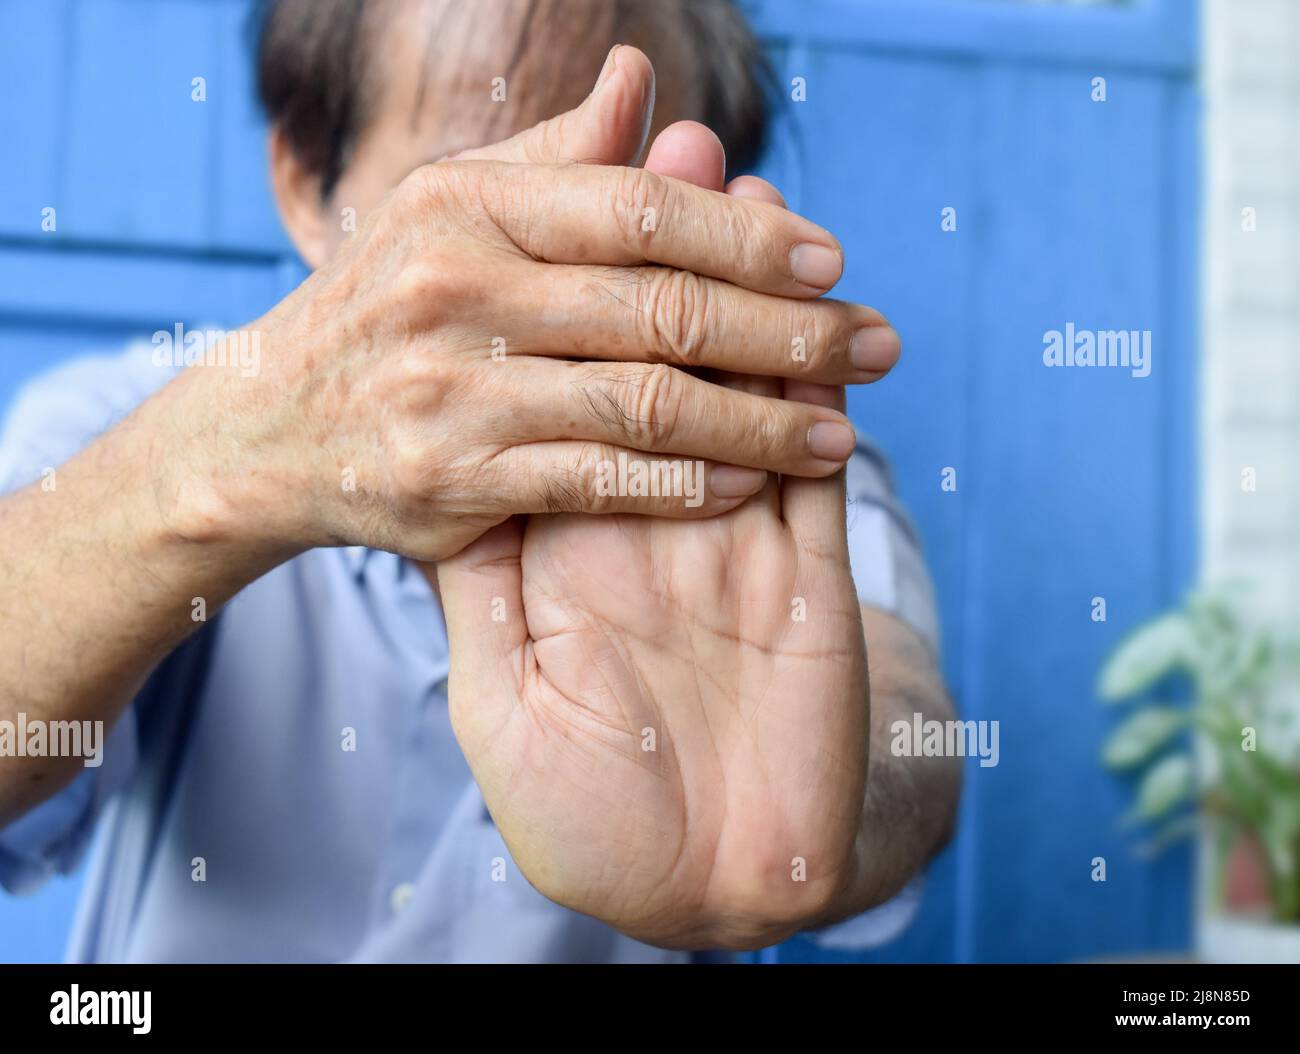 Strengthening exercise for arm muscles of Asian elder male patient with muscle spasm. Stock Photo